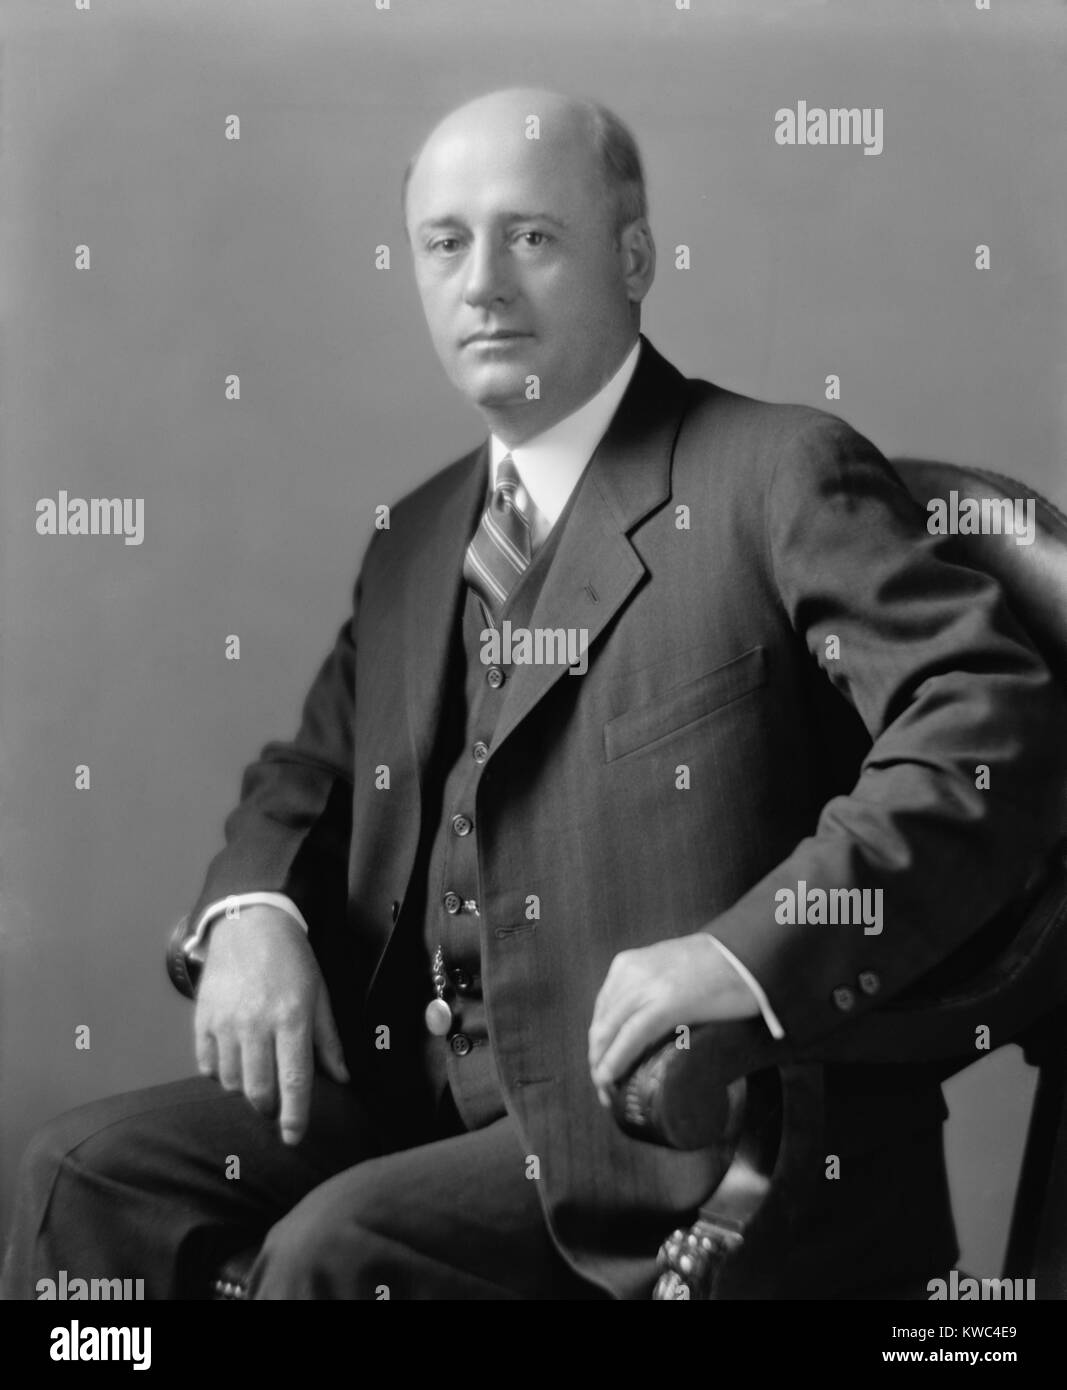 Congressman Sam Rayburn in the 1920s. He represented Texas' 4th district from 1913 to 1961. For seventeen of those years he was Speaker of the House. (BSLOC 2015 15 196) Stock Photo